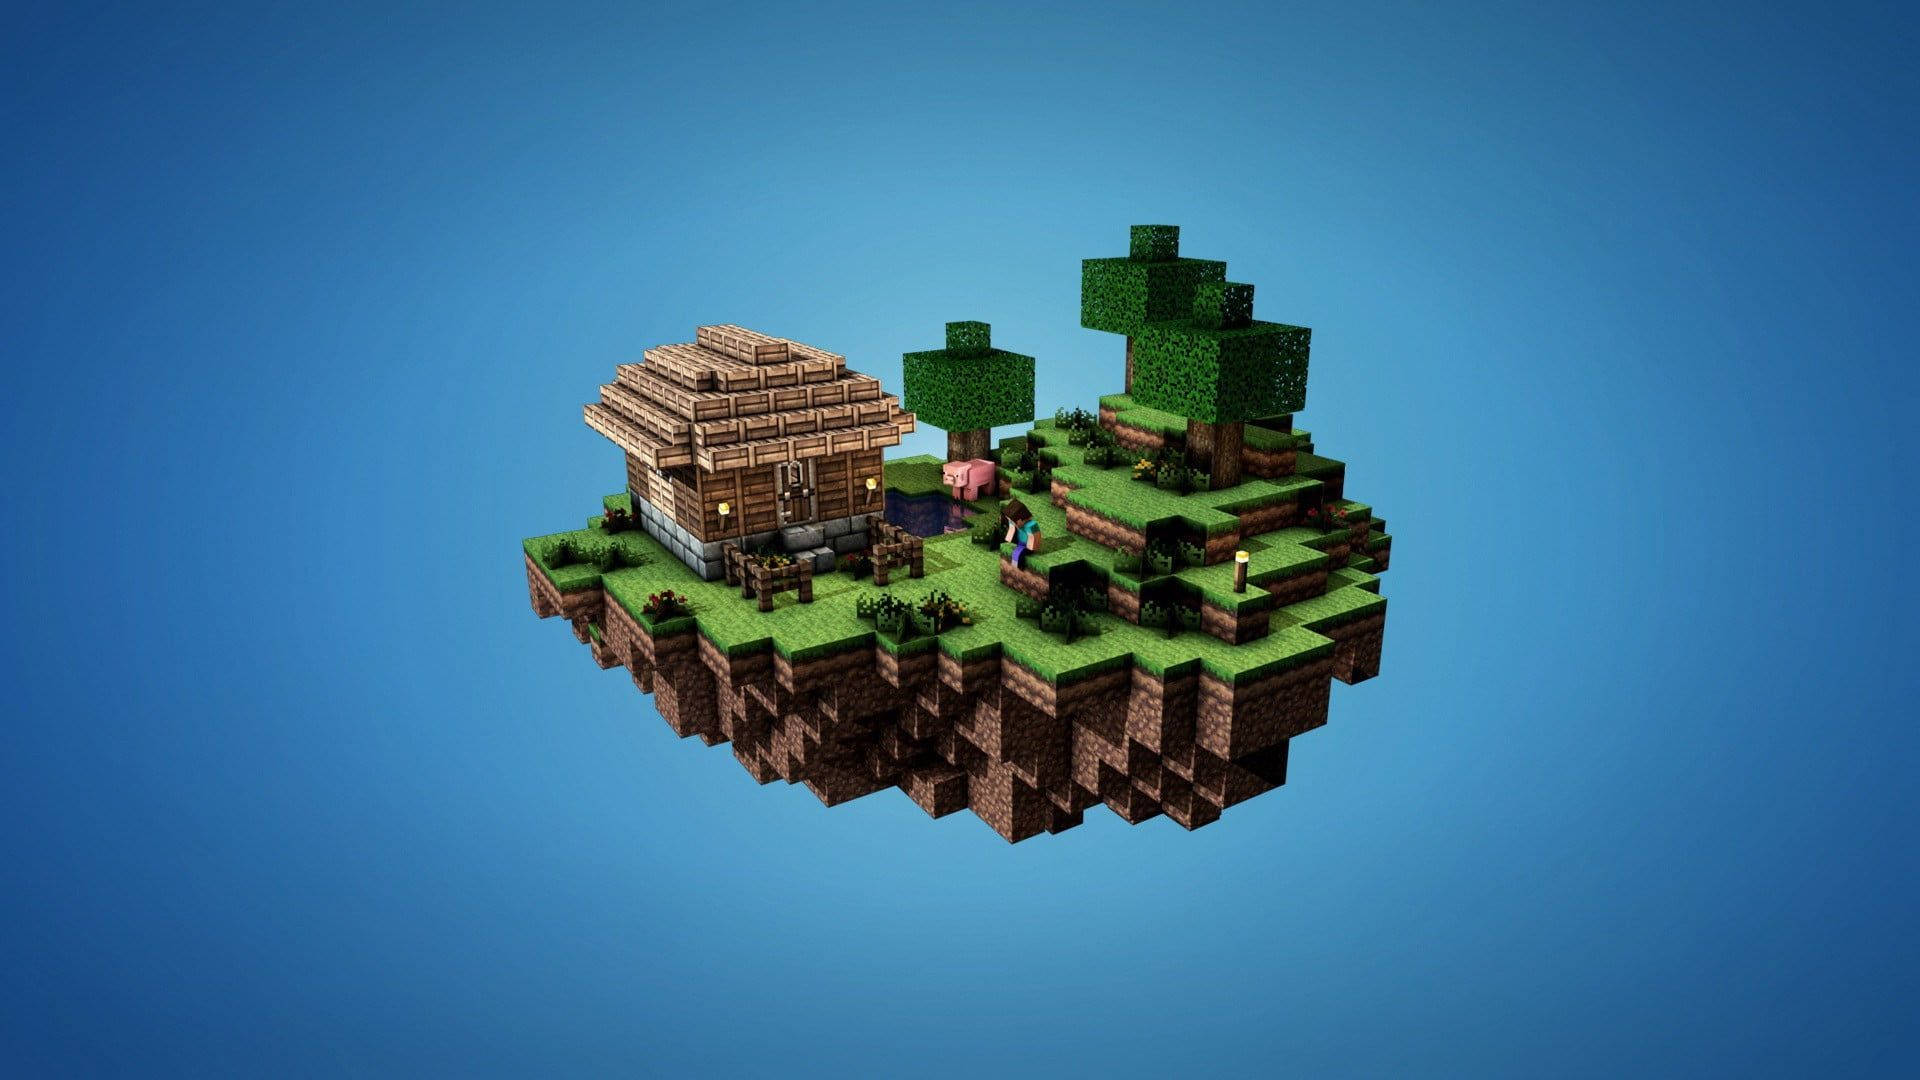 ‘A Breathtaking Floating Island House in Minecraft’ Wallpaper